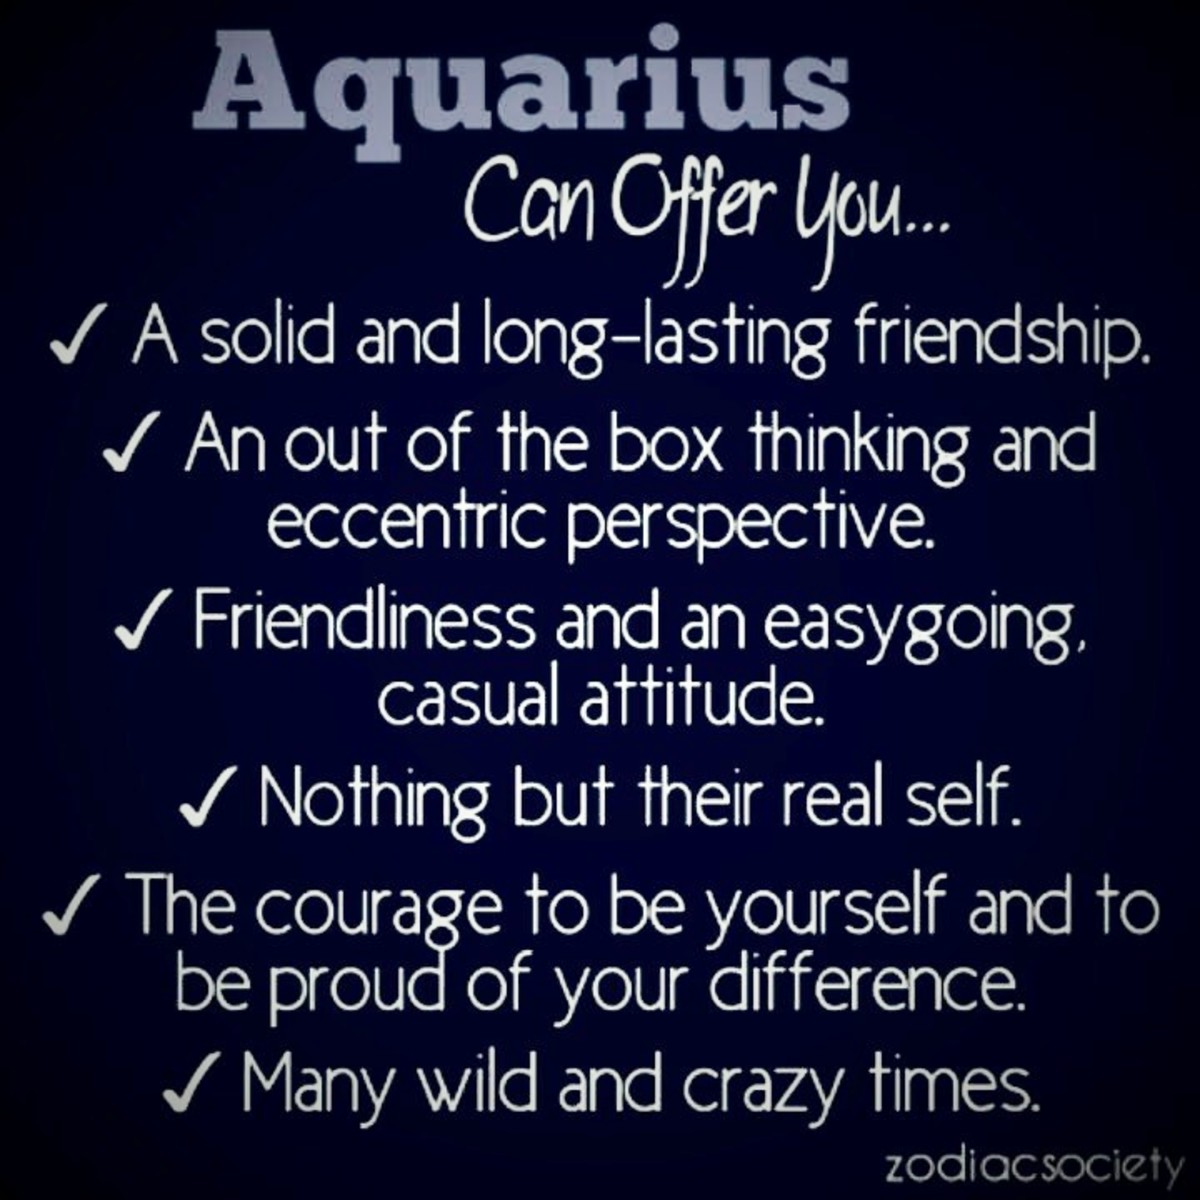 An is you at man aquarius mad when Is Aquarius